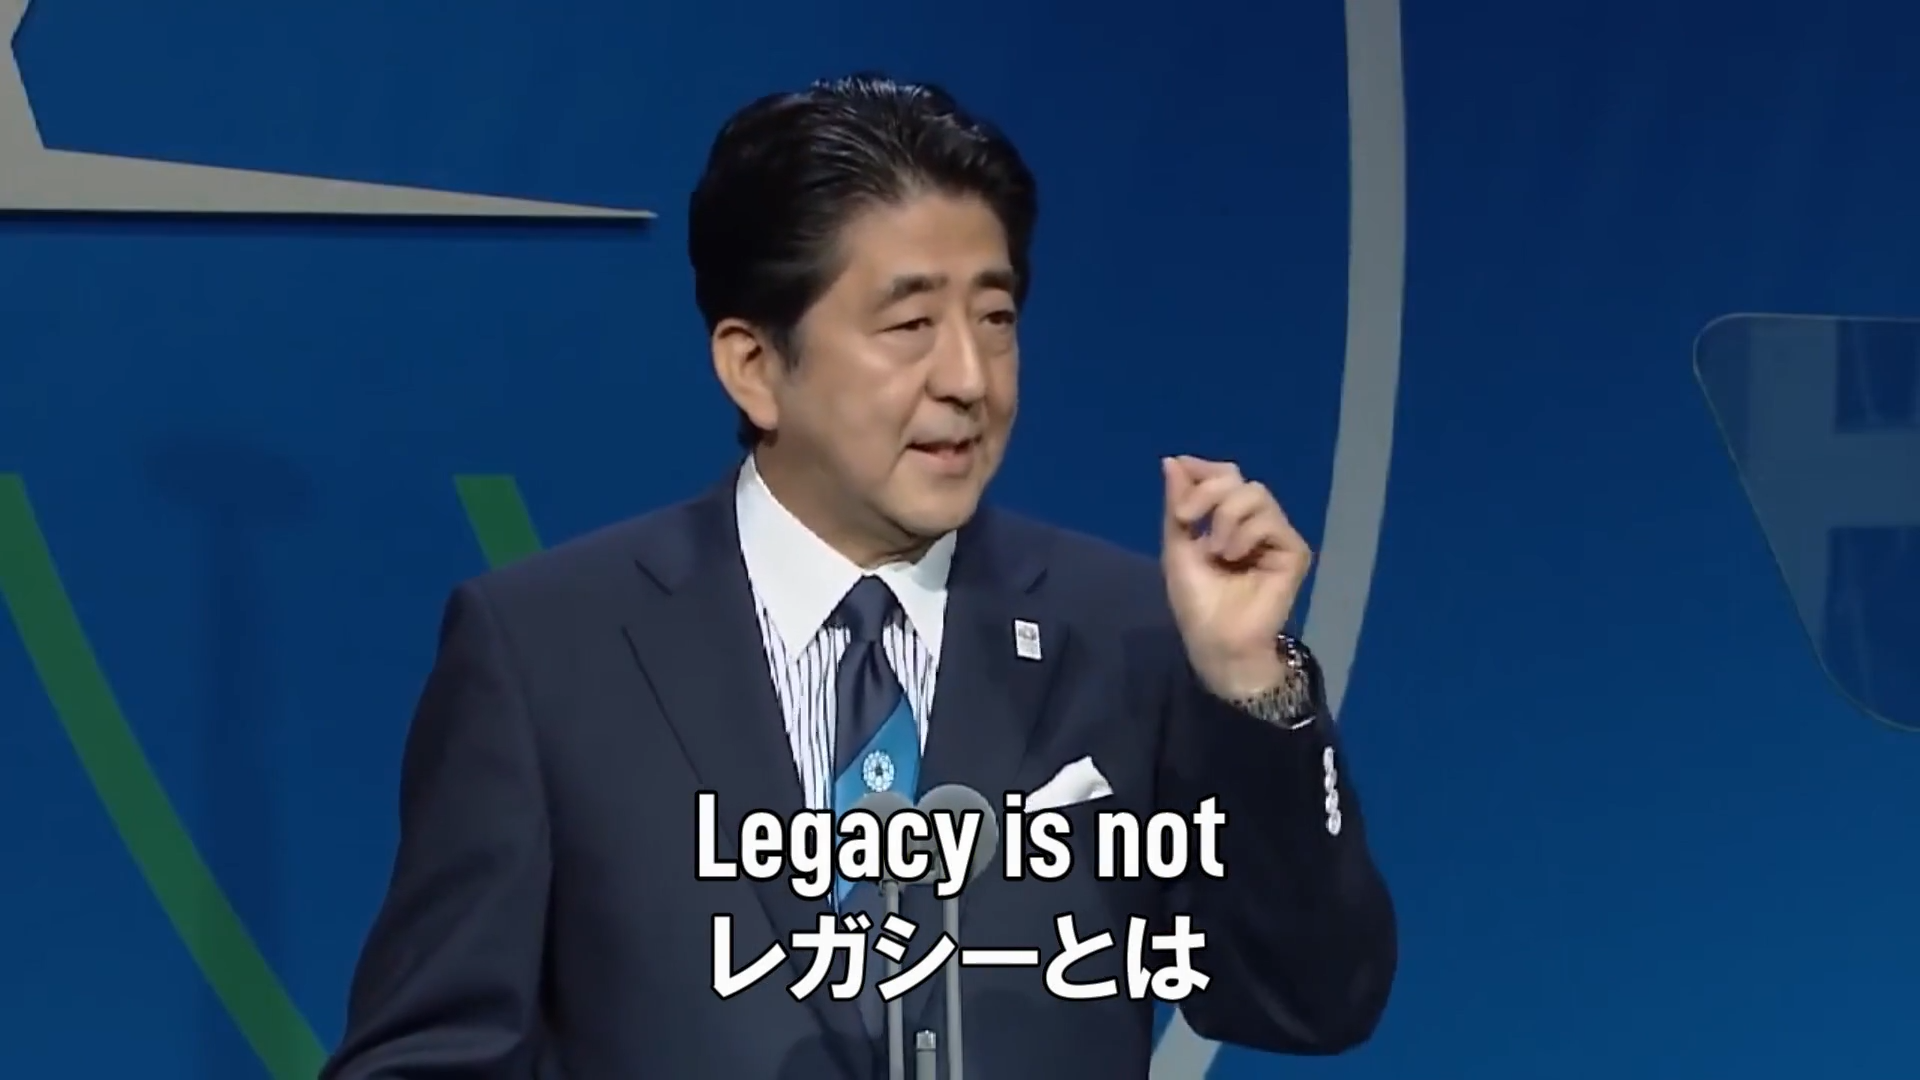 Final Presentation for Olympic Bid by Former Prime Minister Abe